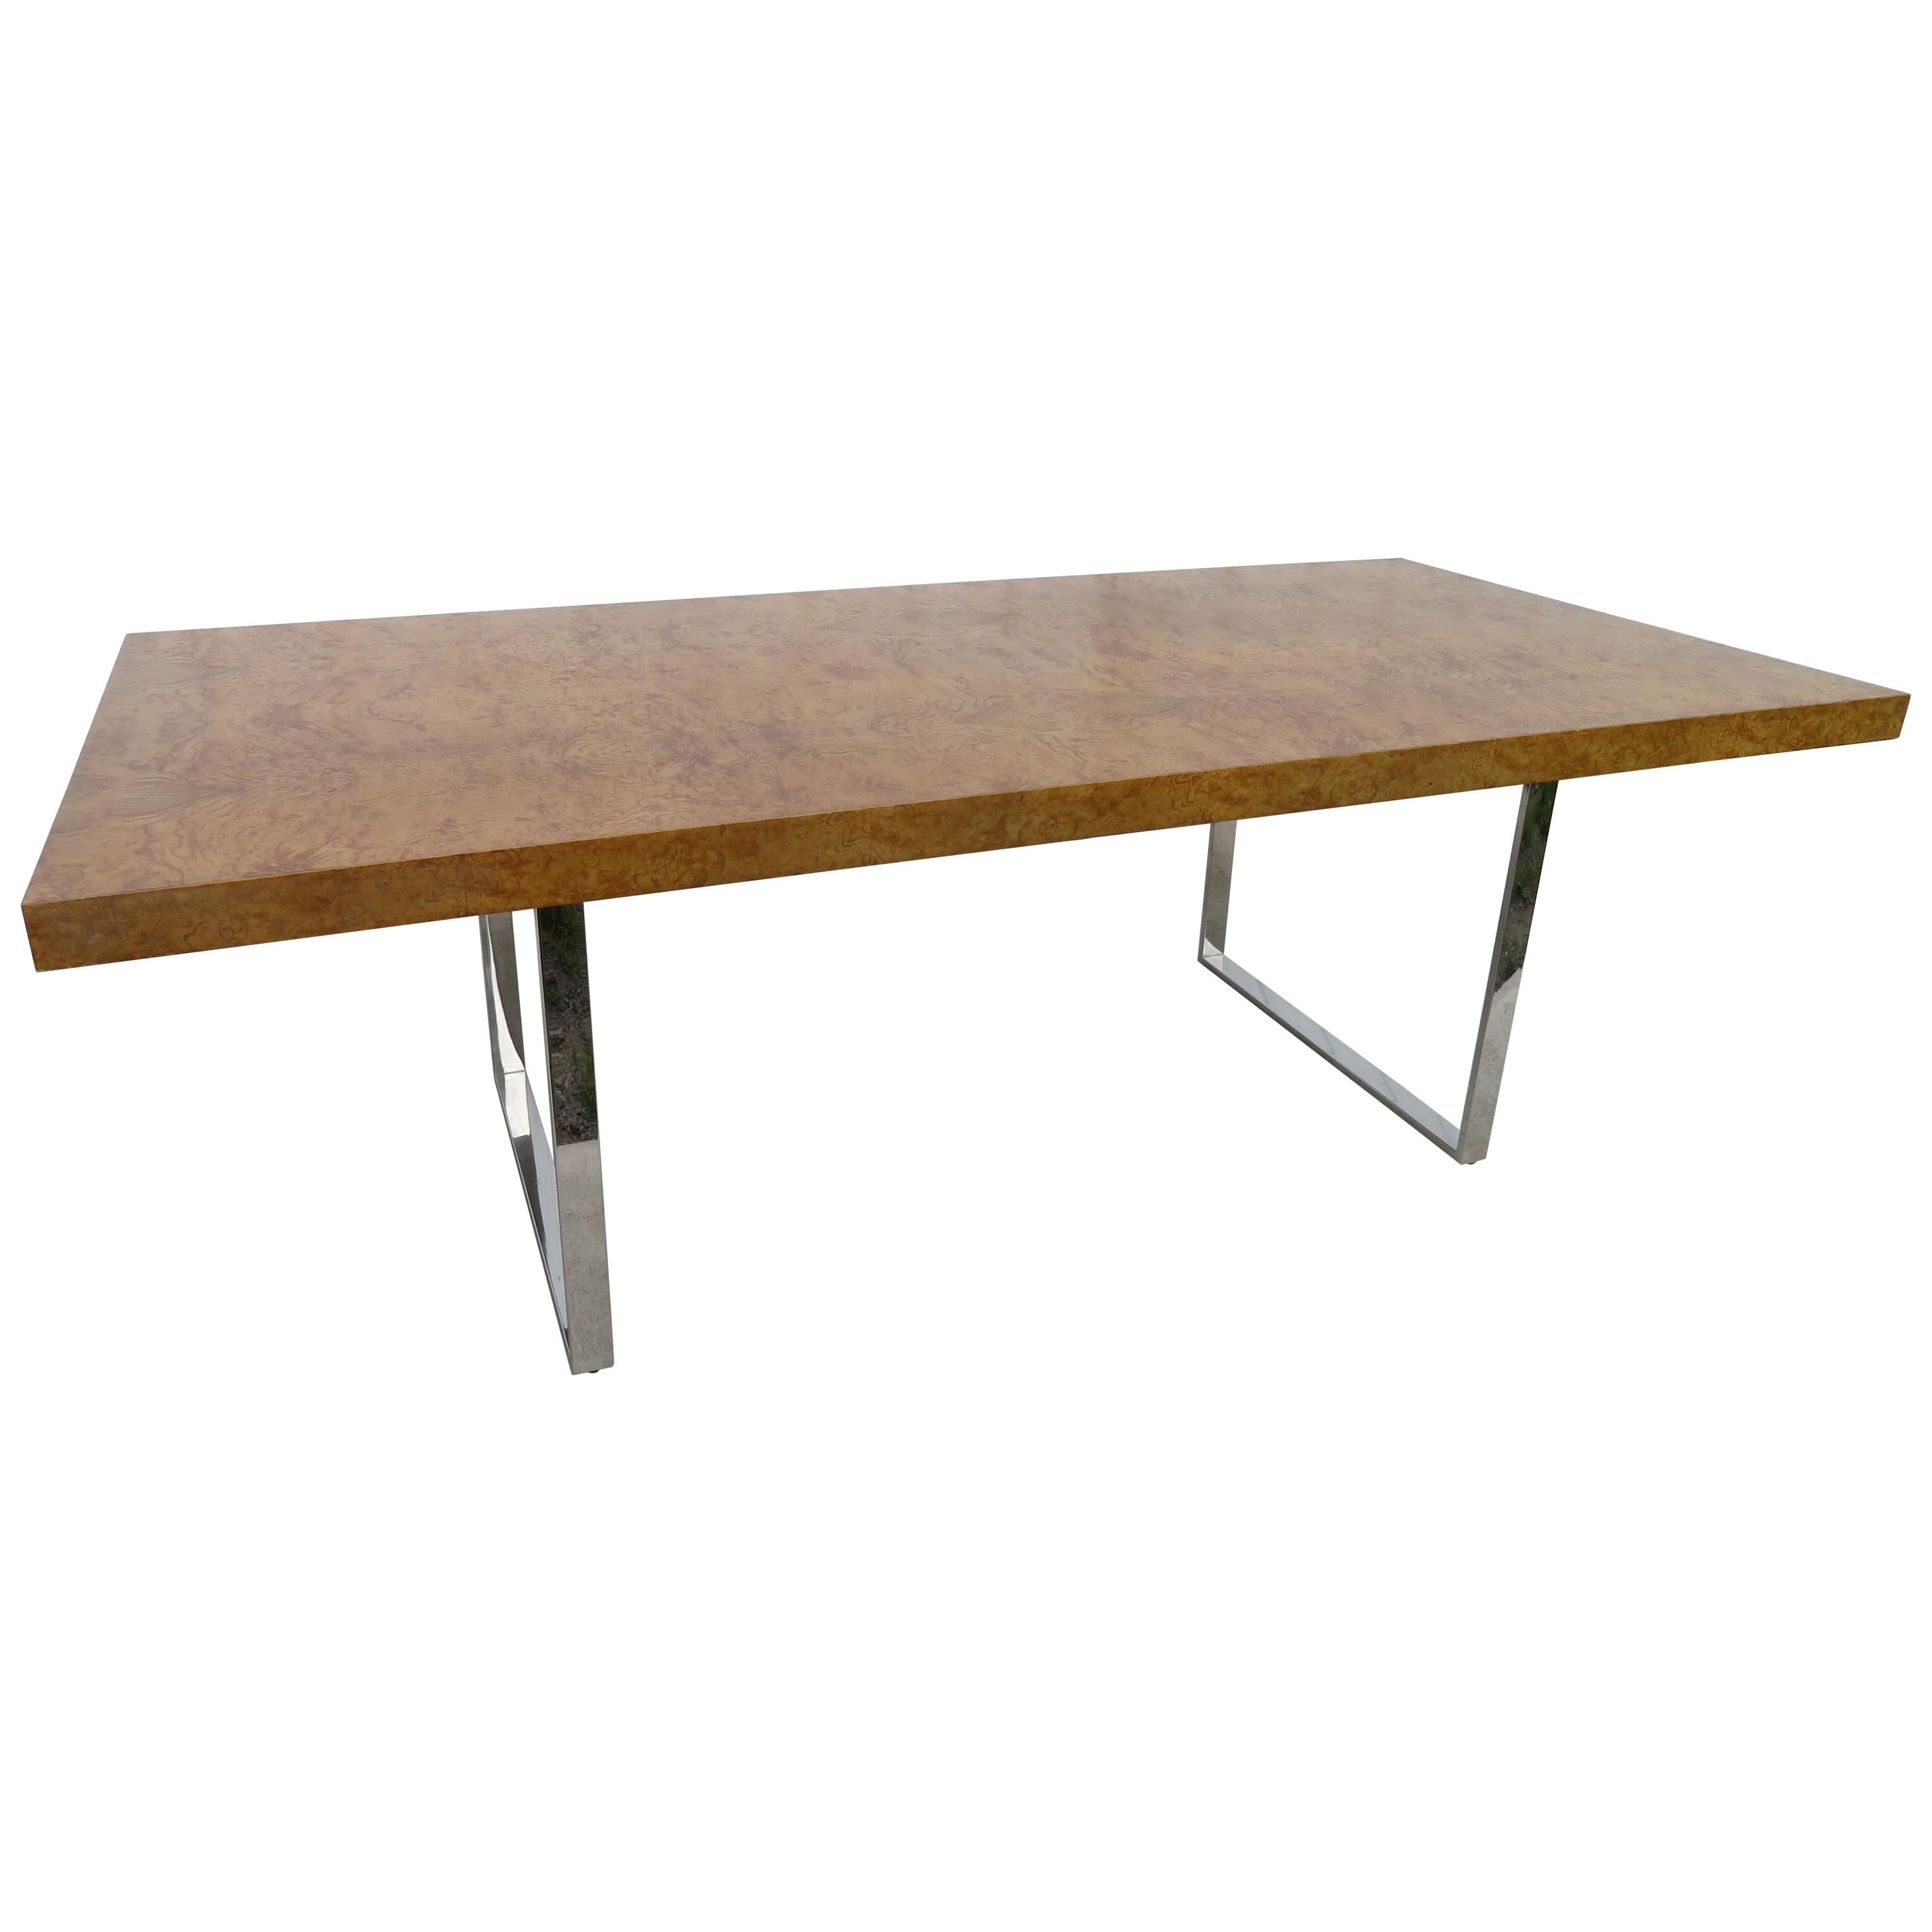 Stunning Milo Baughman Long Olive Wood Chrome Dining Table For Sale